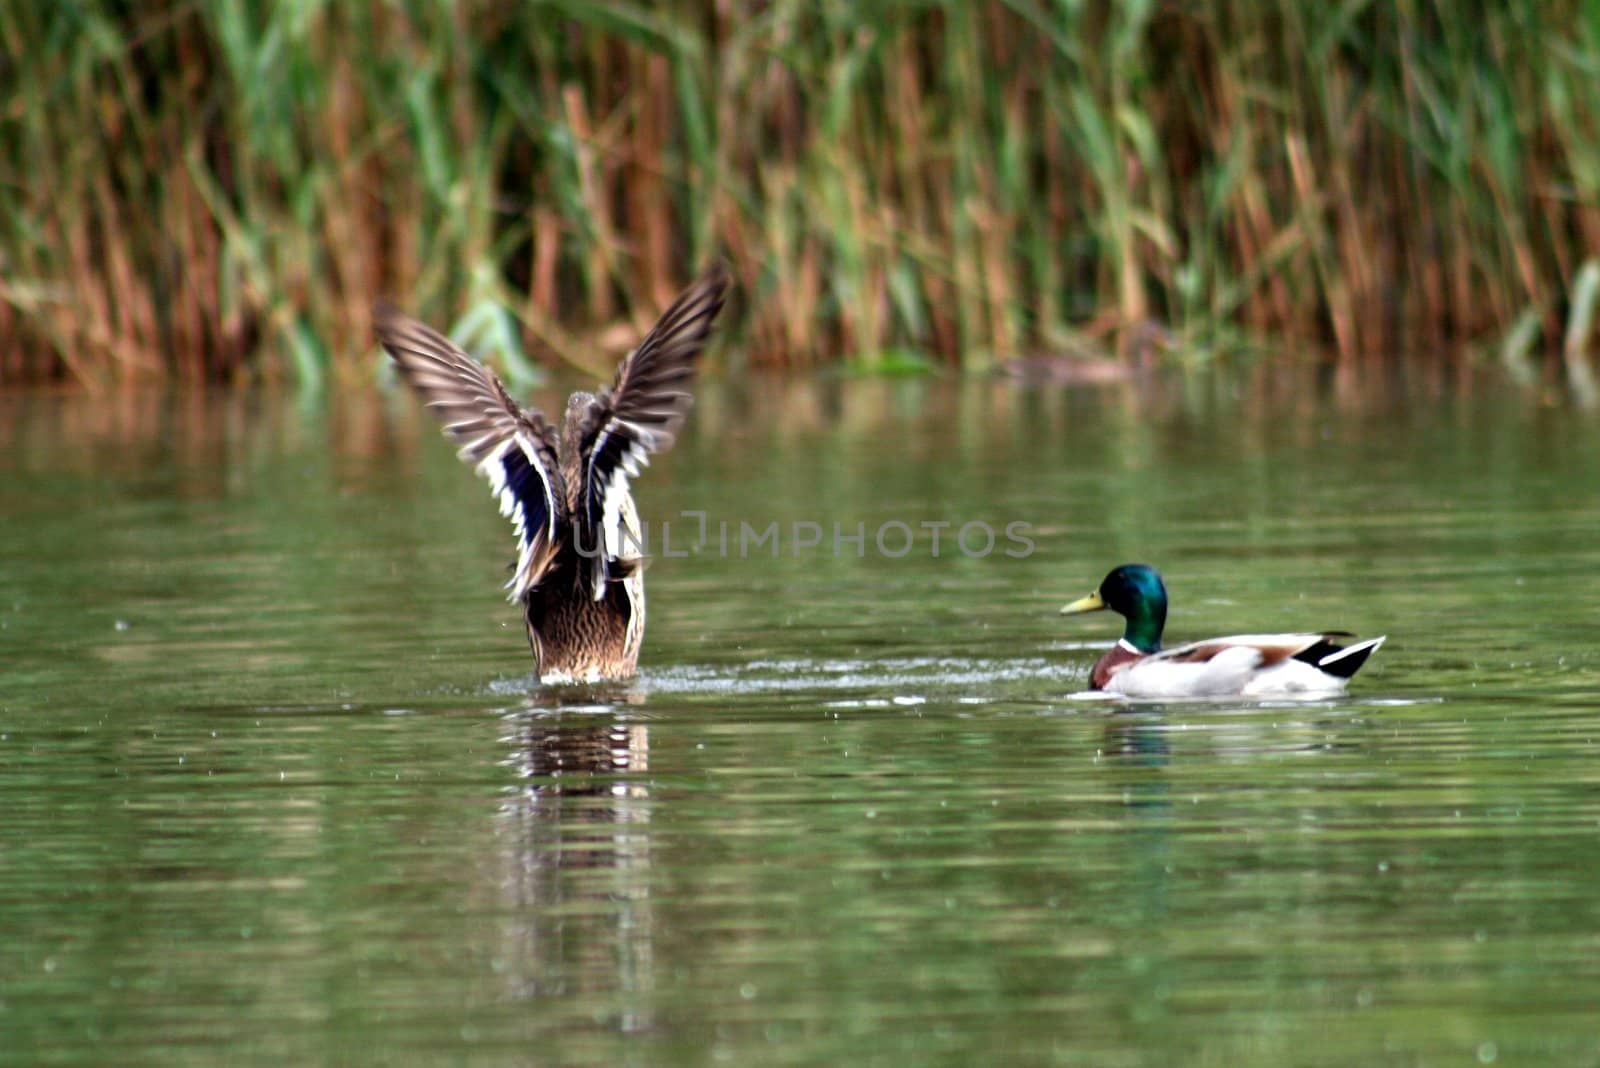 2 ducks in a lake one about to take off!